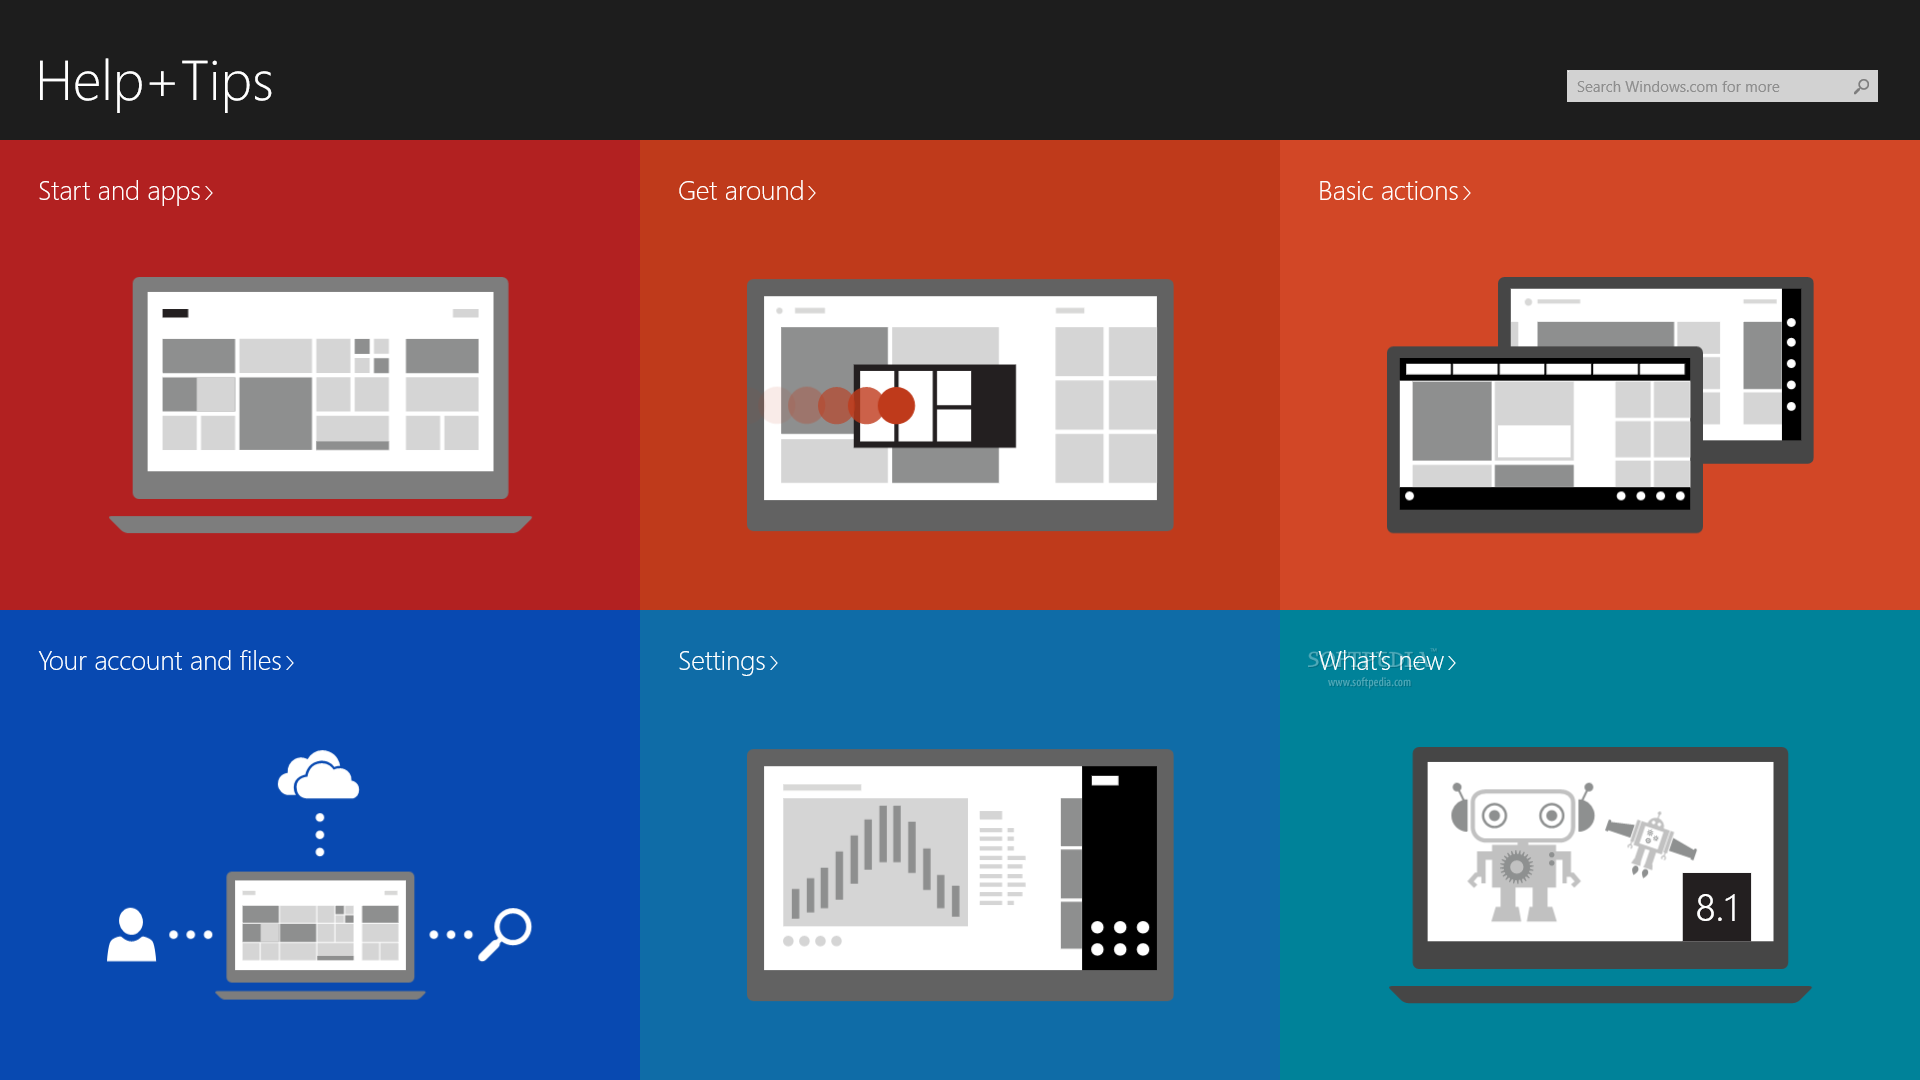 Help+Tips for Windows 8.1